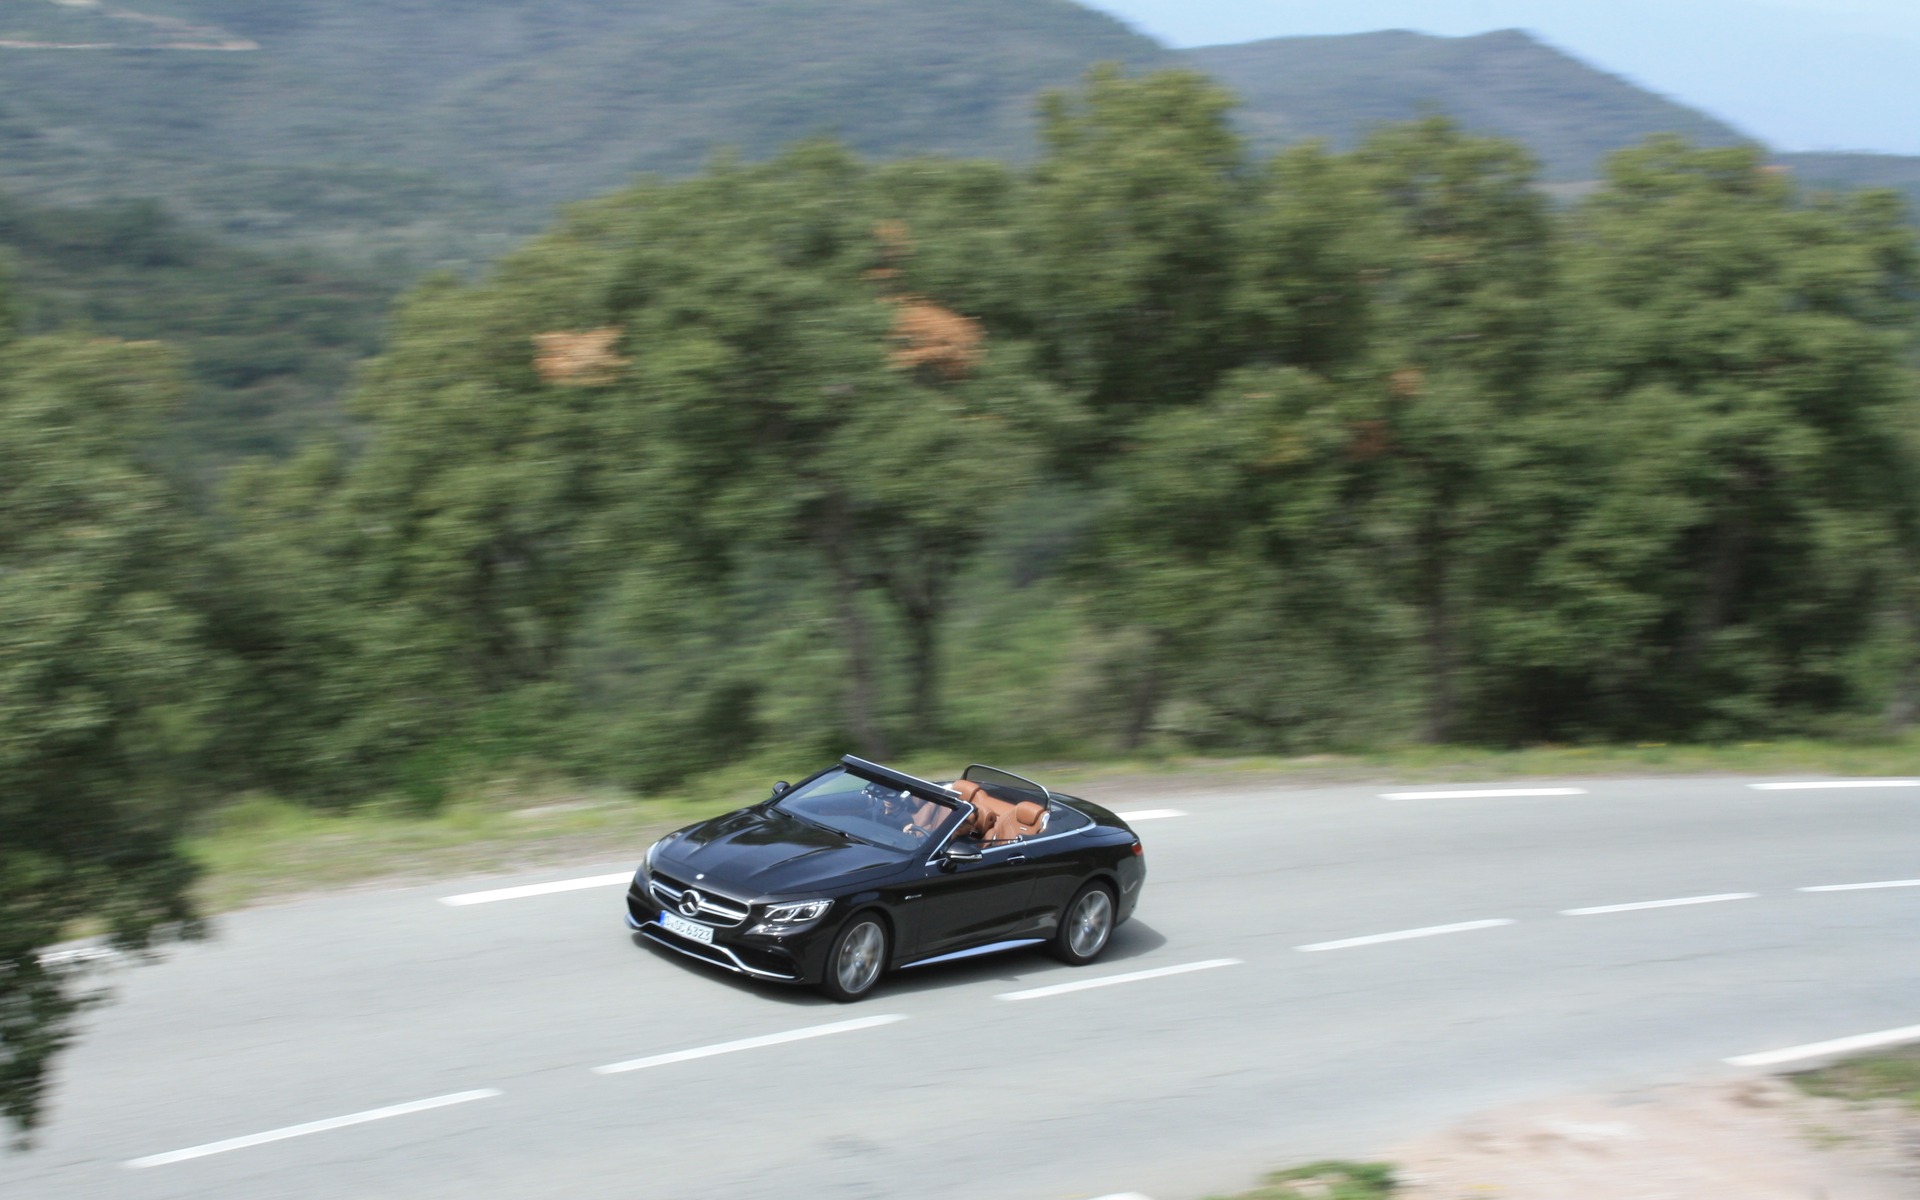 2017 Mercedes-AMG S 63 4MATIC Cabriolet